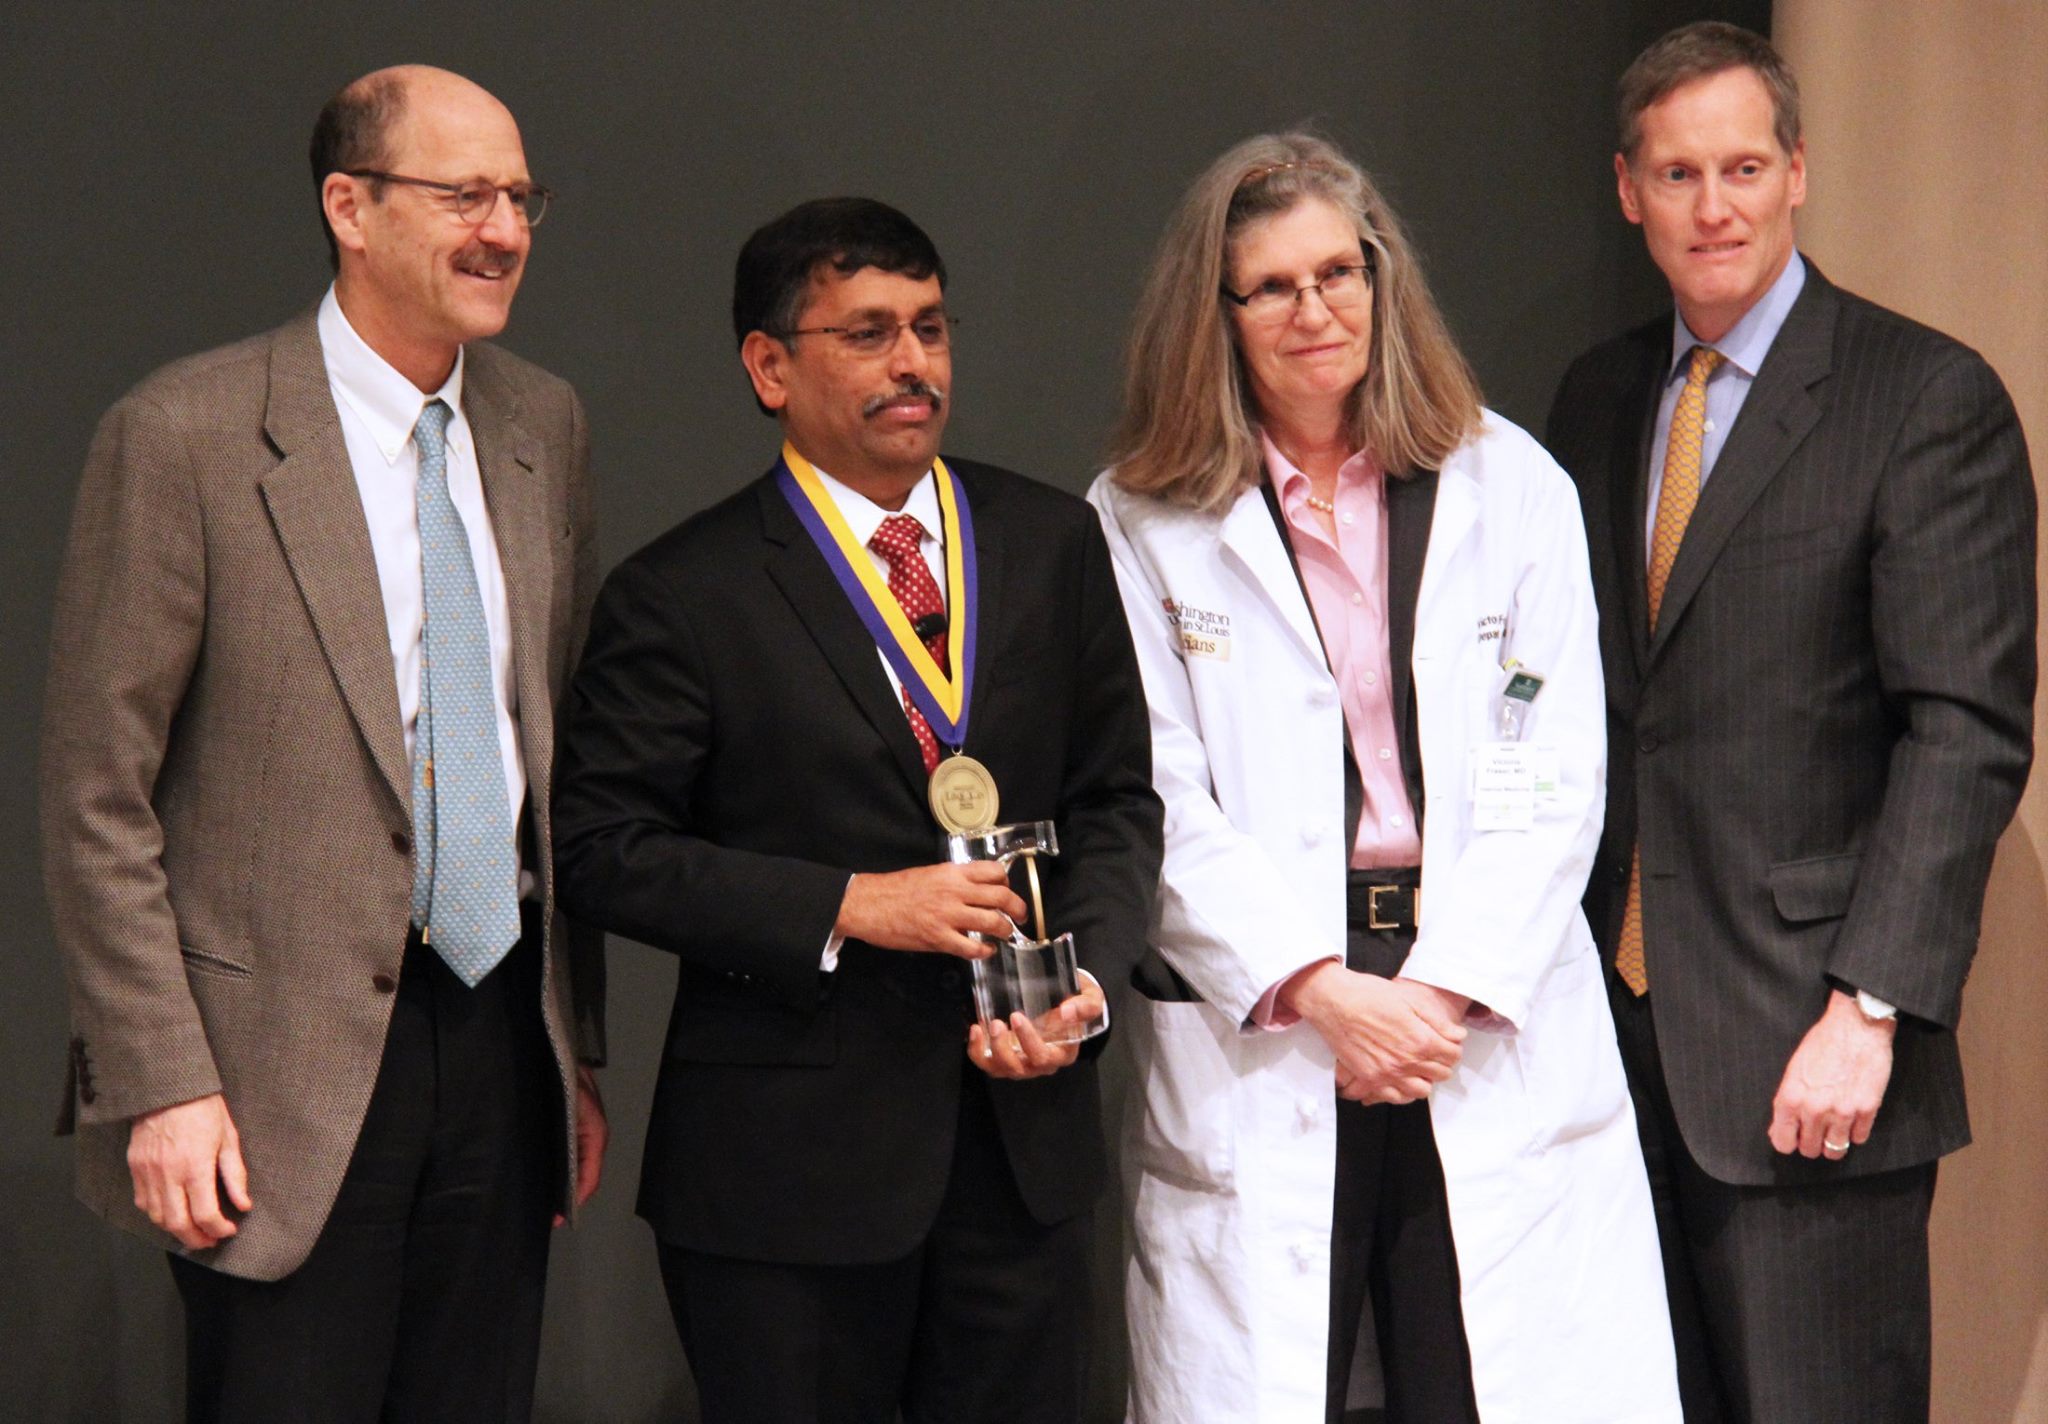 Ramaswamy Govindan, MD, (second from left) was been named the Anheuser-Busch Endowed Chair in Medical Oncology during an installation ceremony on Jan. 12. 